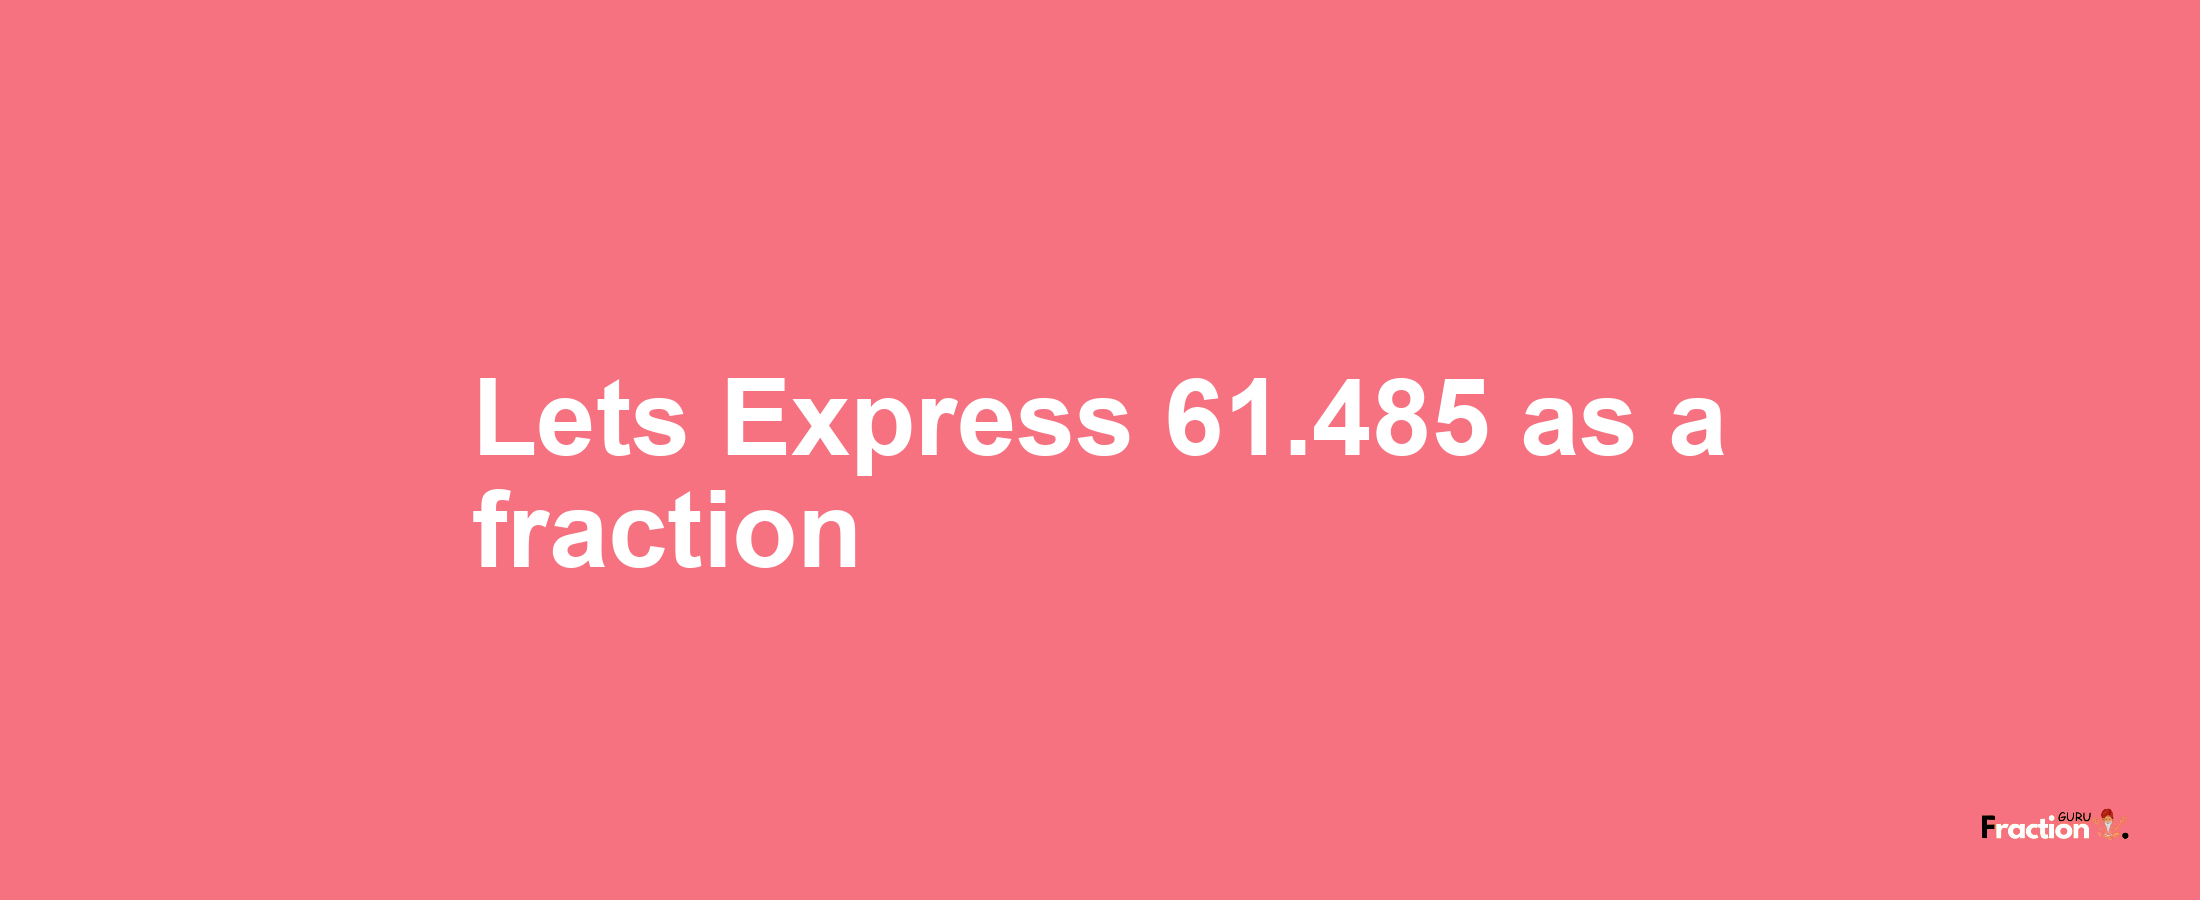 Lets Express 61.485 as afraction